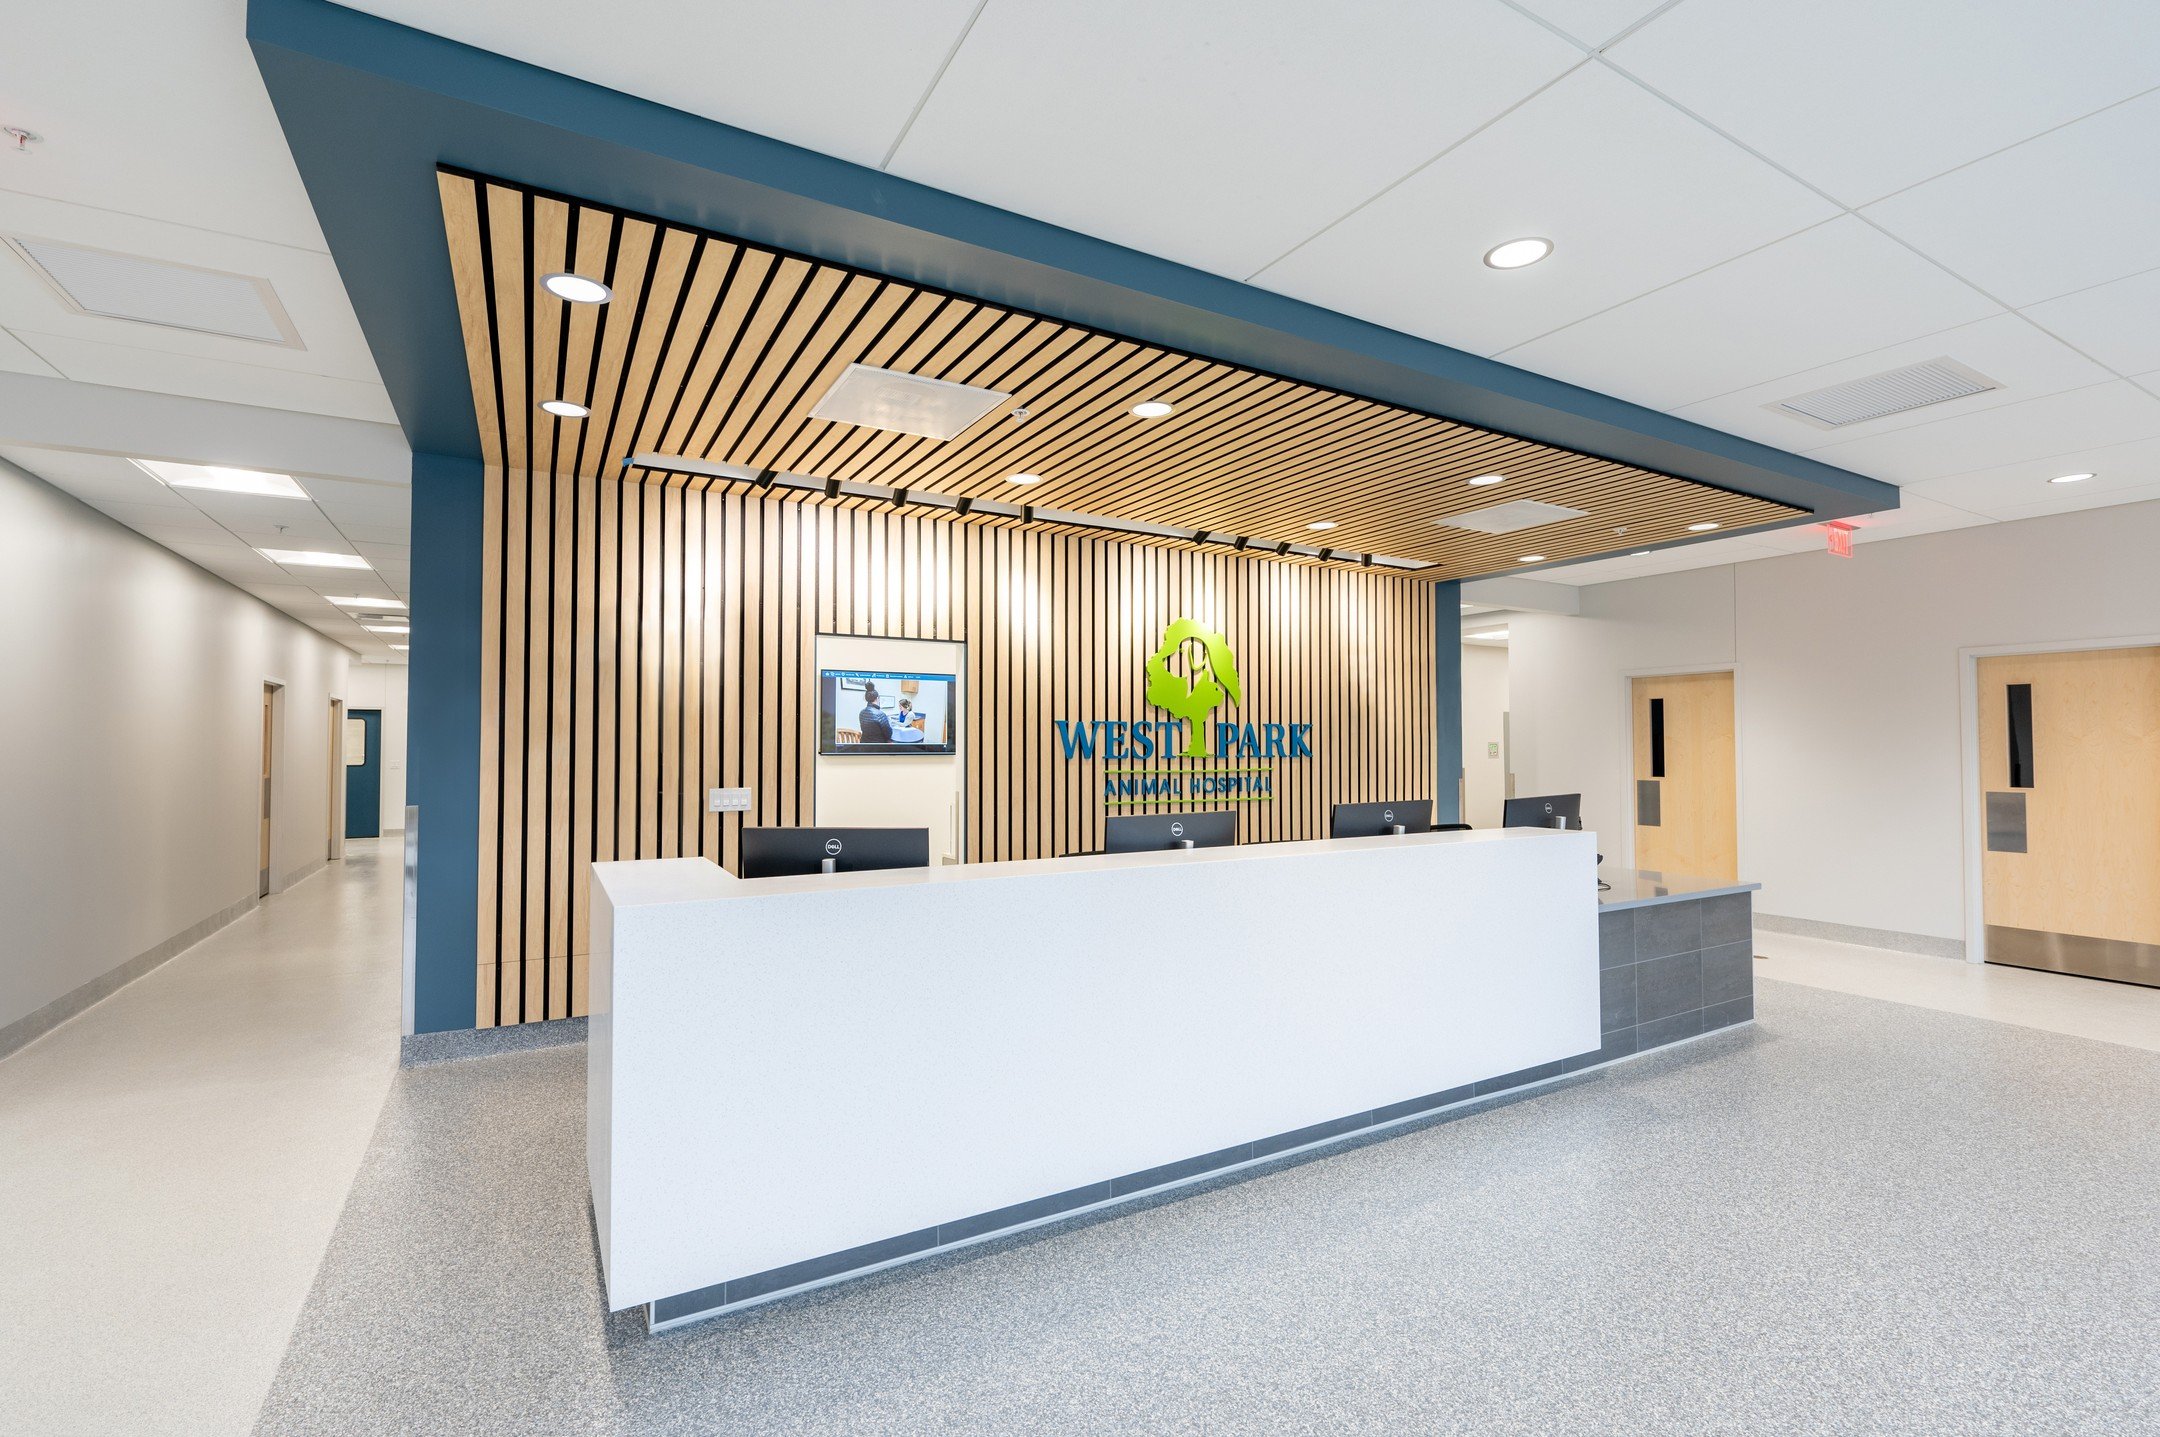 We're excited to share Westpark Animal Hospital's new building in Cleveland! Spanning 35,000 sf, this new facility offers top-notch care with exam rooms, surgical suites, specialized medial wards, and staff space to support the growing needs of the v